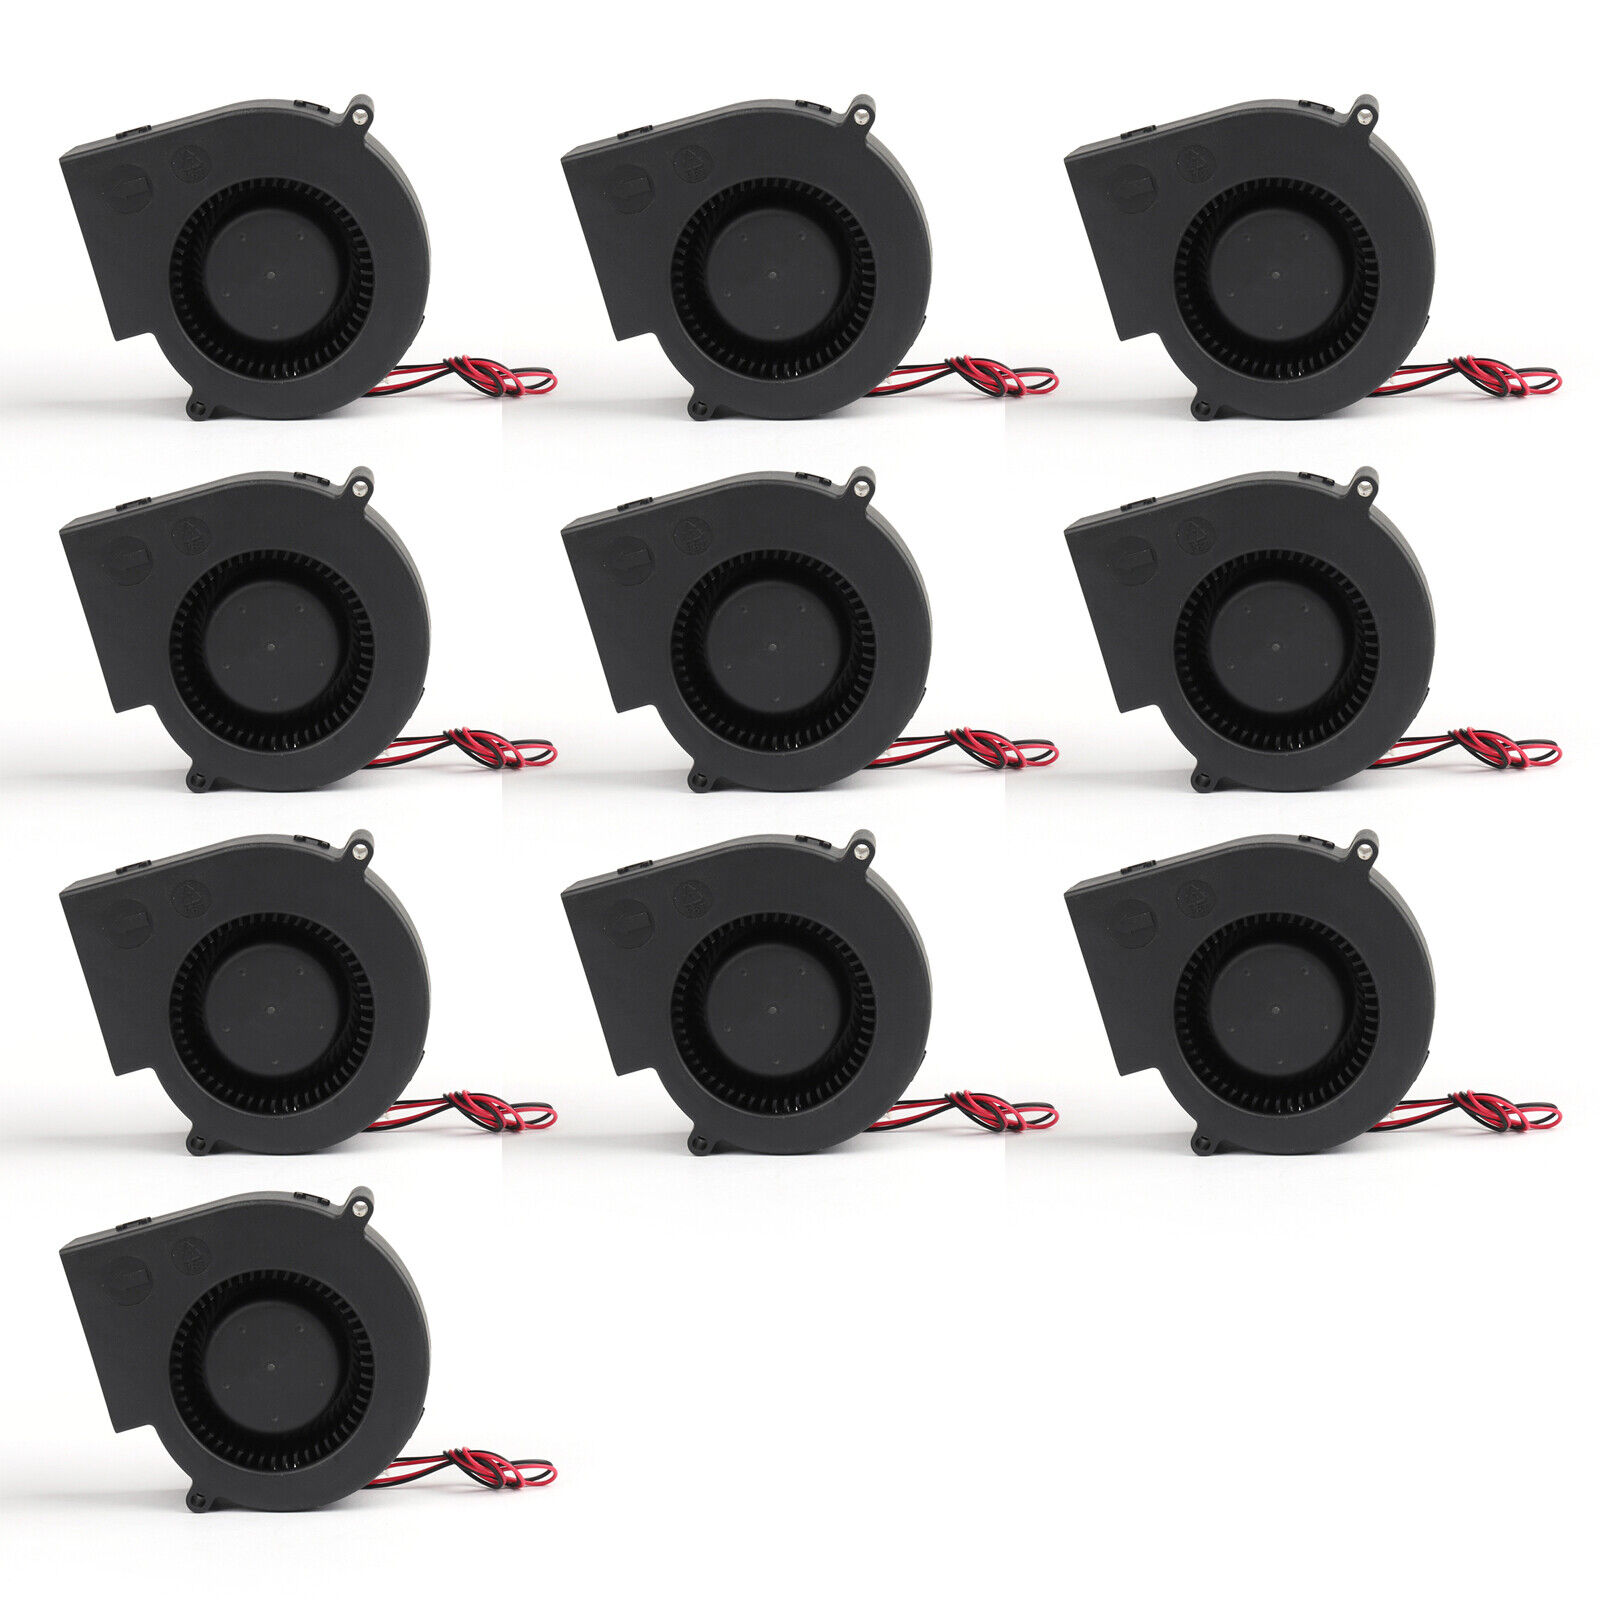 10PCS DC Brushless Cooling PC Computer Fan 12V 9733s 97x97x33mm 0.5A 2 Pin Wire